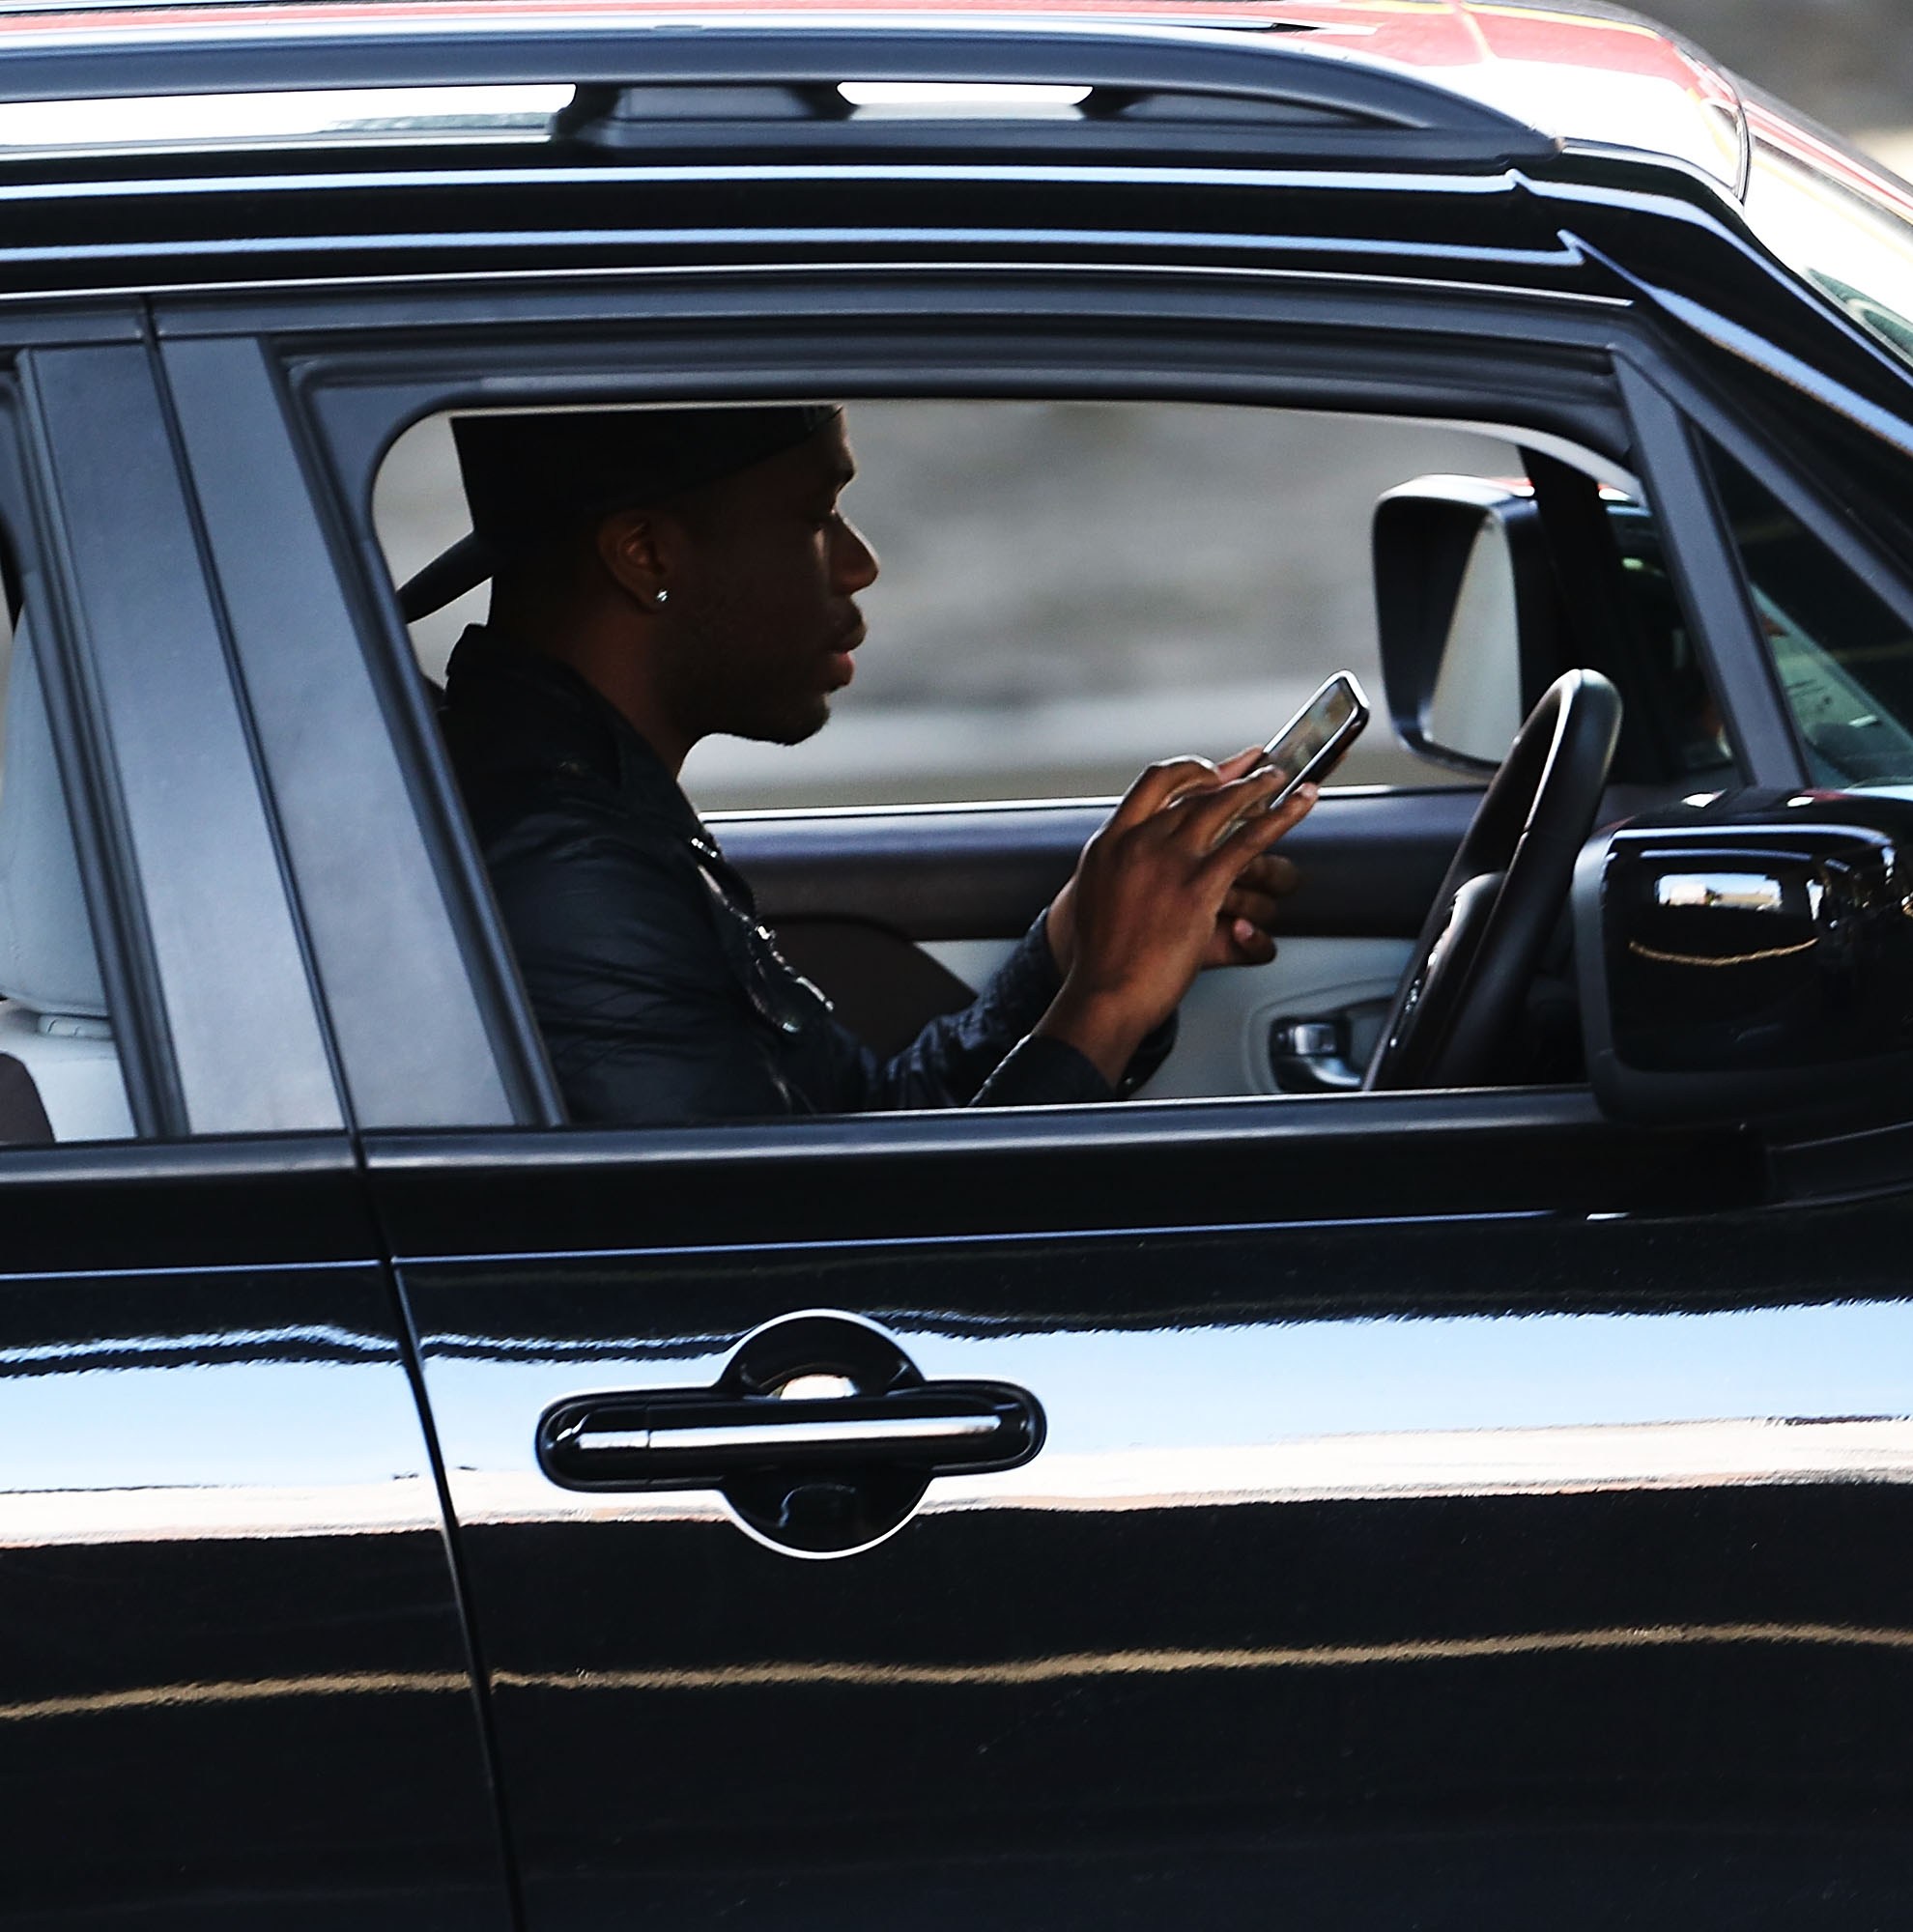 American drivers are now even more distracted by their phones. Pedestrian deaths are soaring.